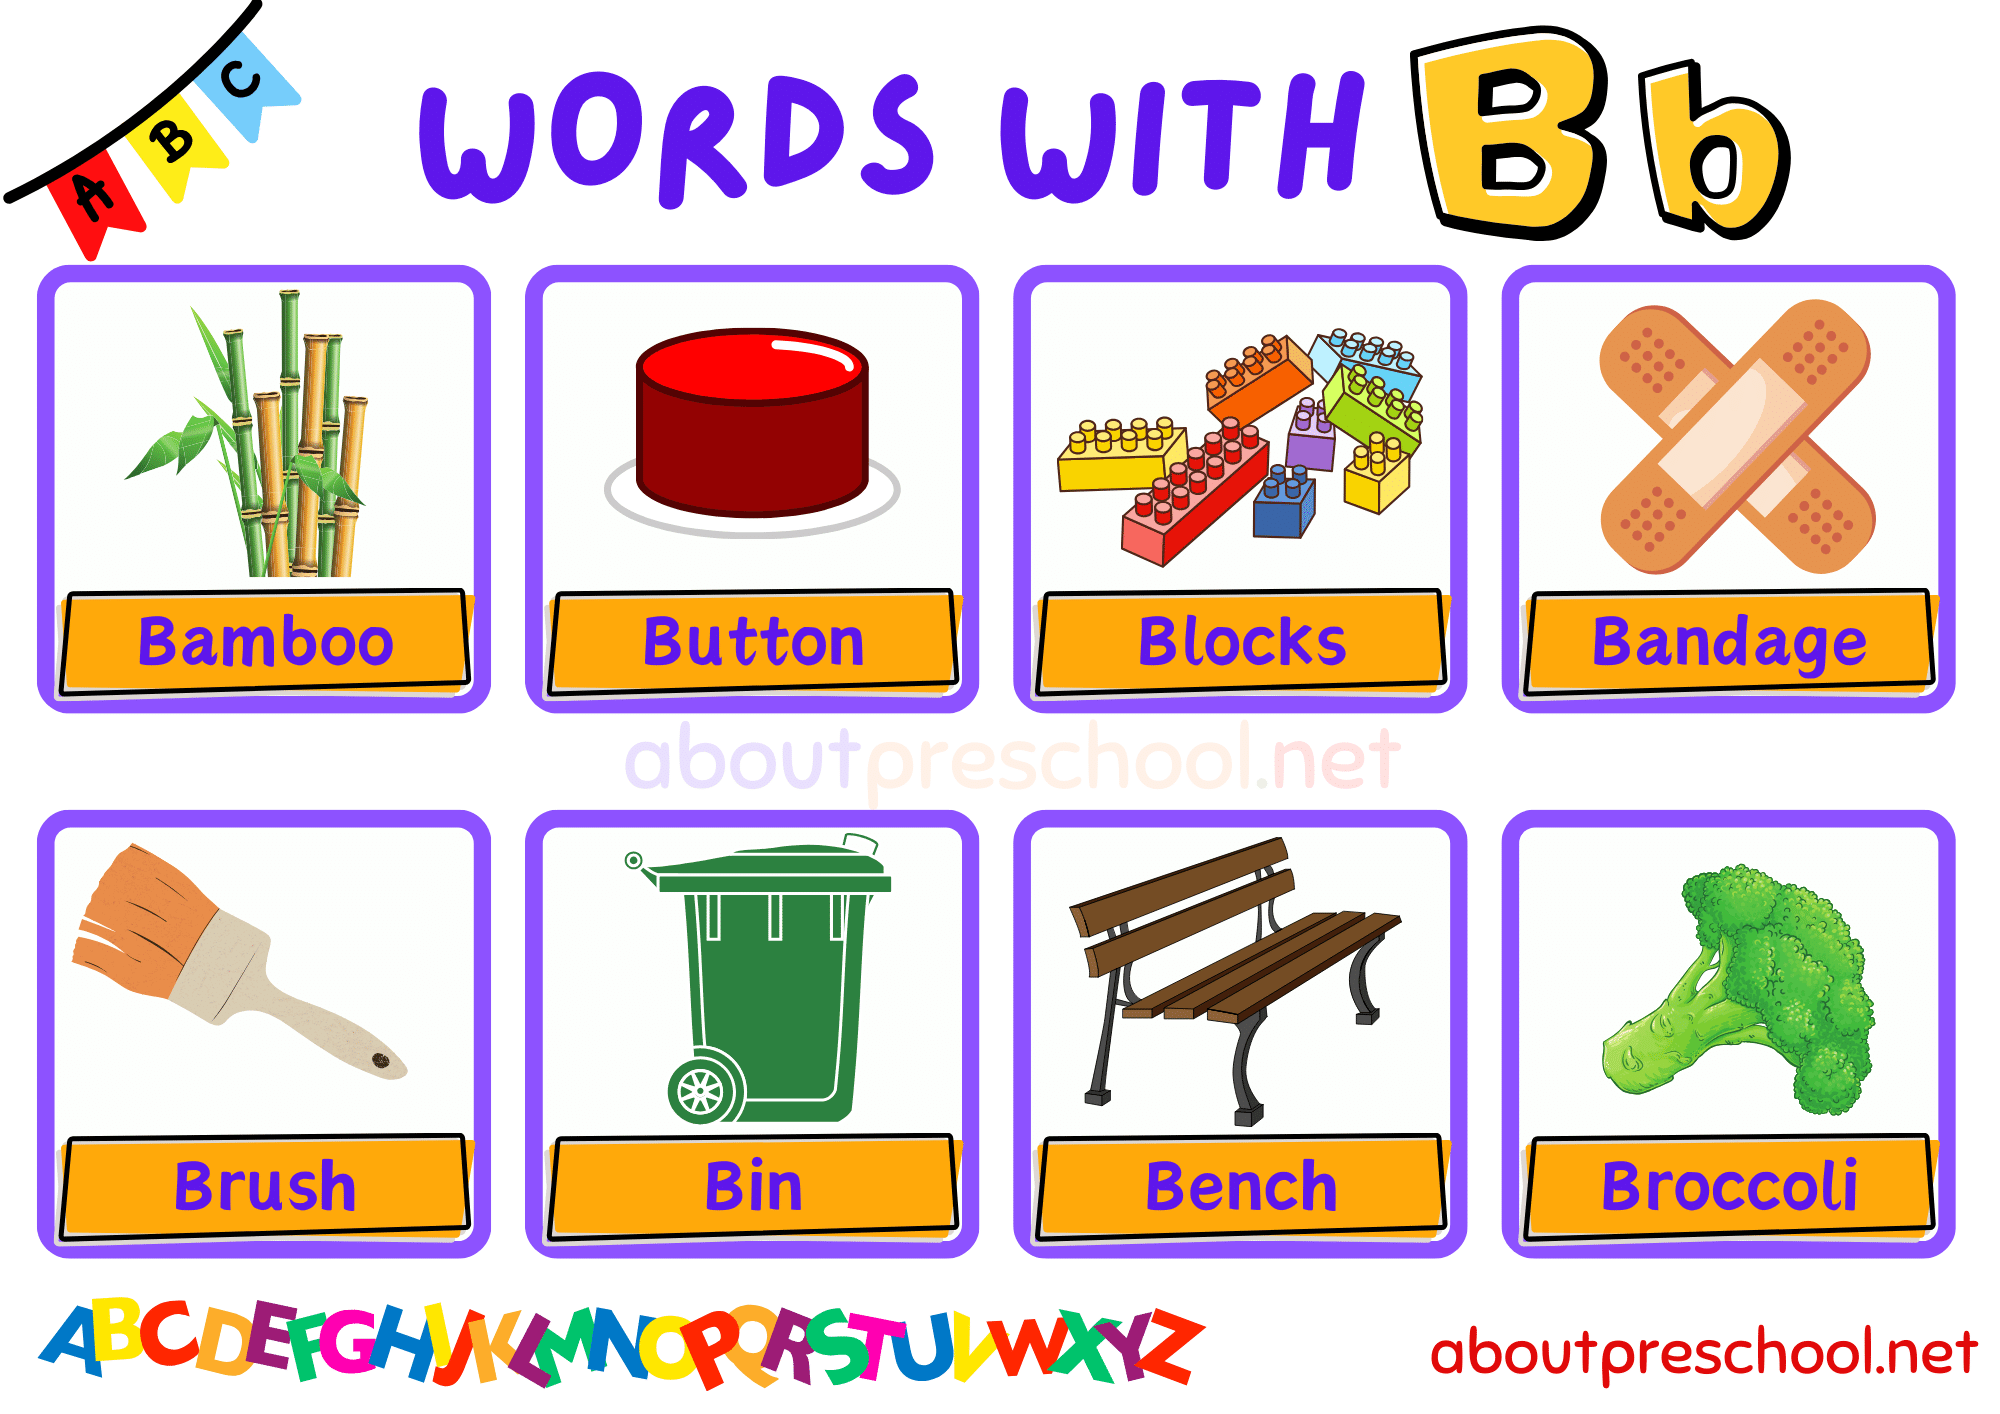 Words With B